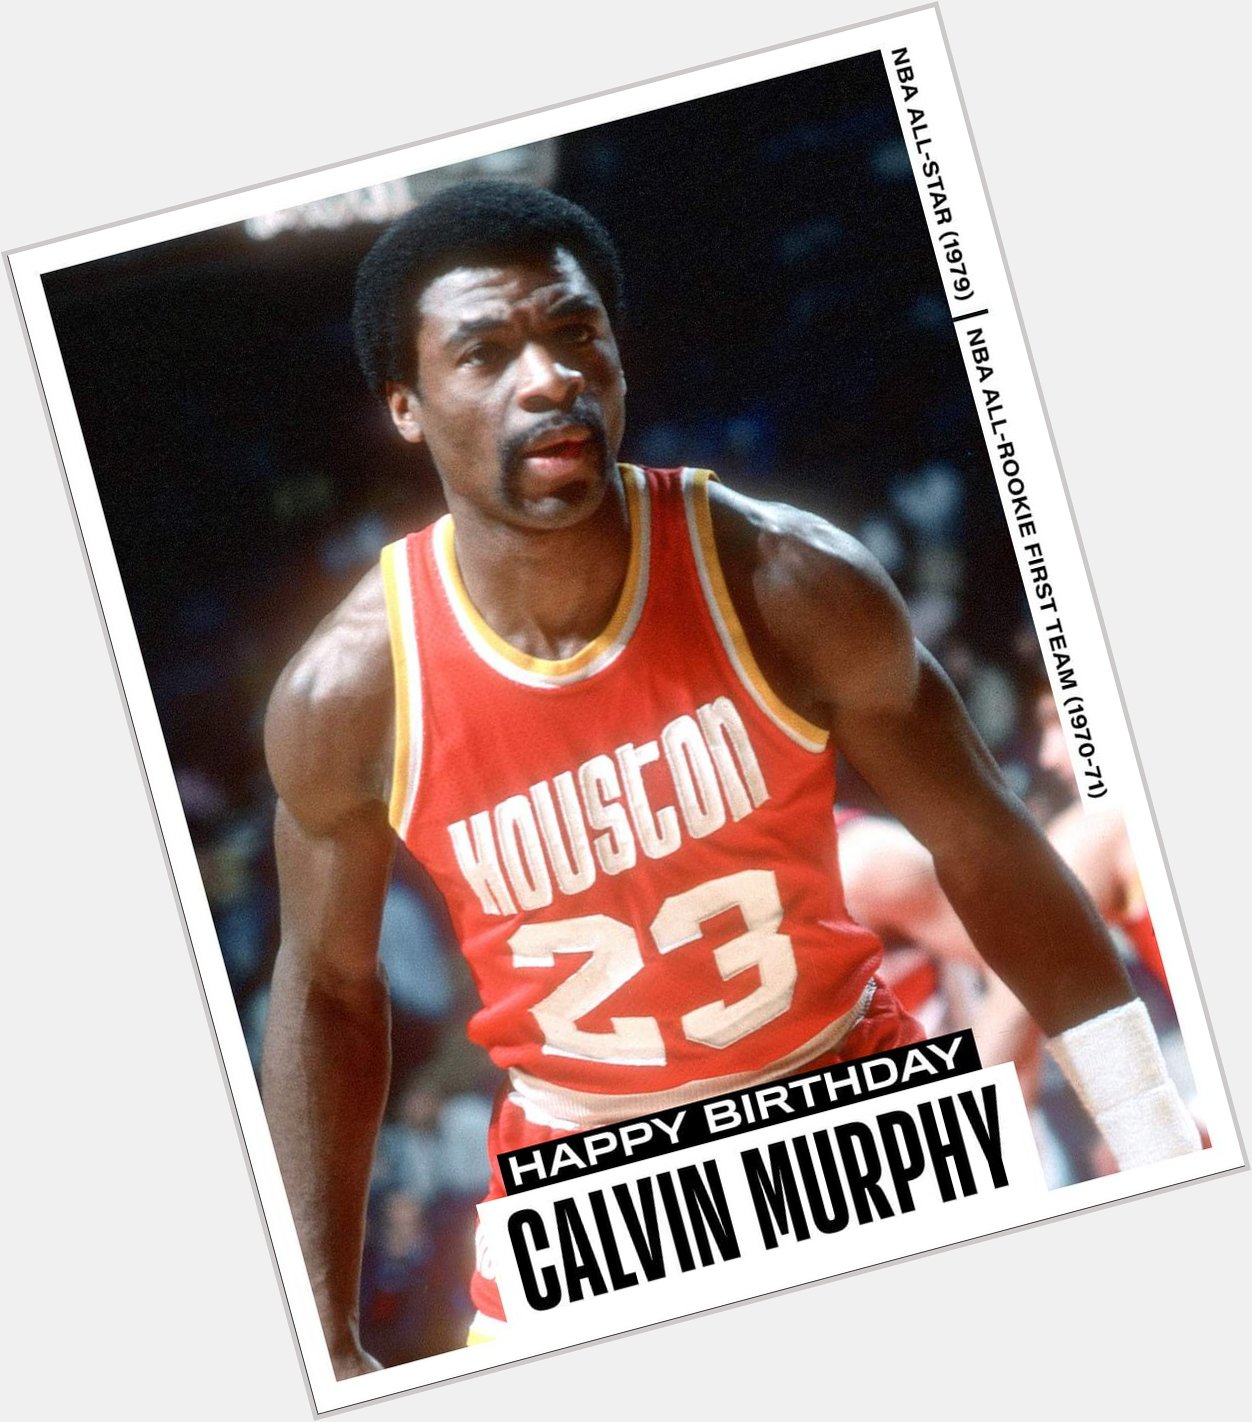 Join us in wishing a Happy 75th Birthday to and Hoophall inductee, Calvin Murphy! 